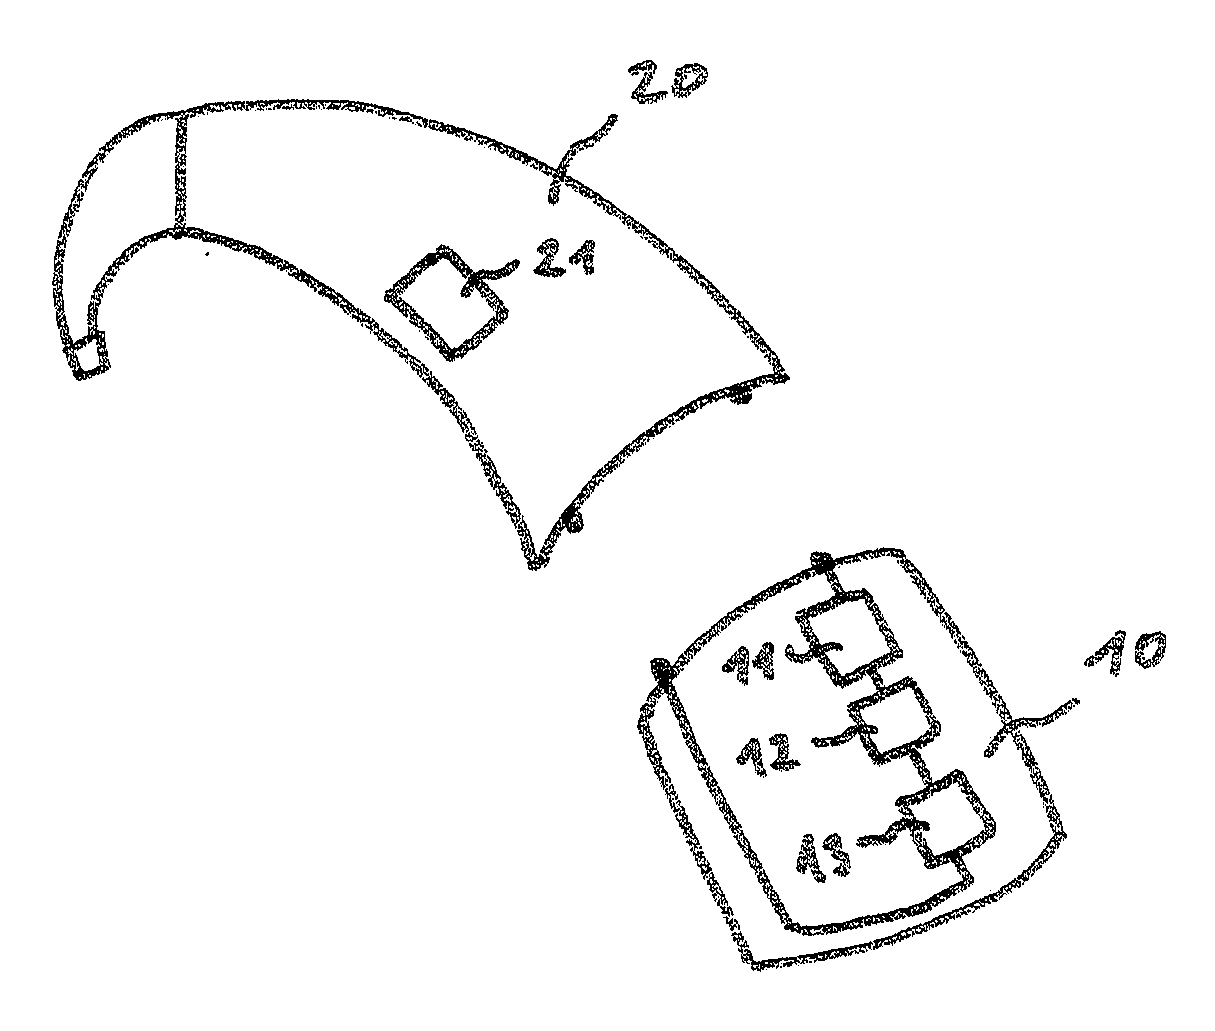 Configurable FM receiver for hearing device